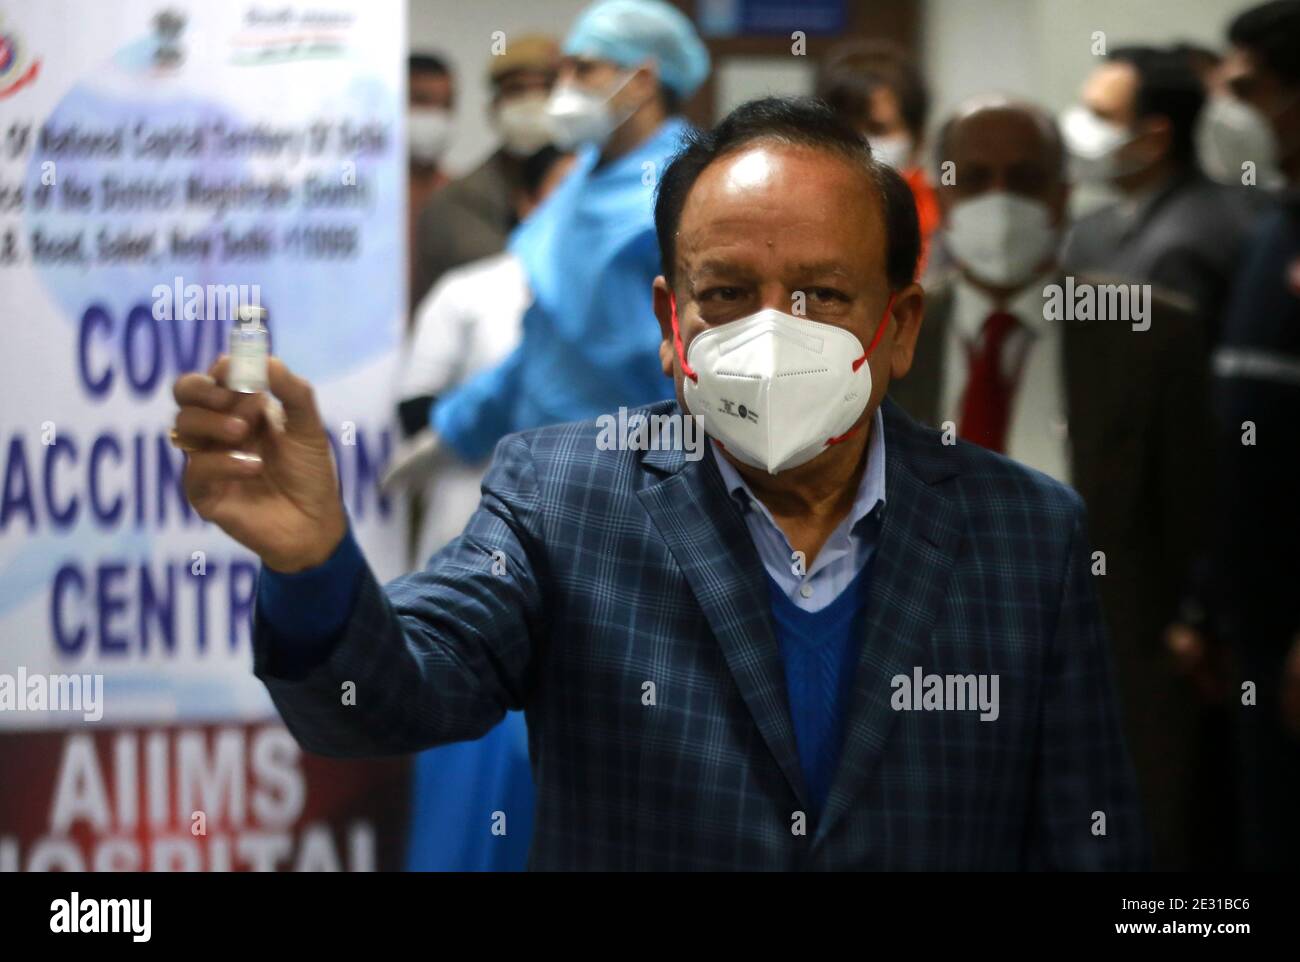 Health Minister Dr. Harshvardhan shows a vail of Covid-19 vaccine at All India Institute of Medical Sciences (AIIMS) in New Delhi on Saturday January 16, 2021 marking launch of the worlds largest immunisation drive. (Photo by Sondeep Shankar/Pacific Press) Stock Photo